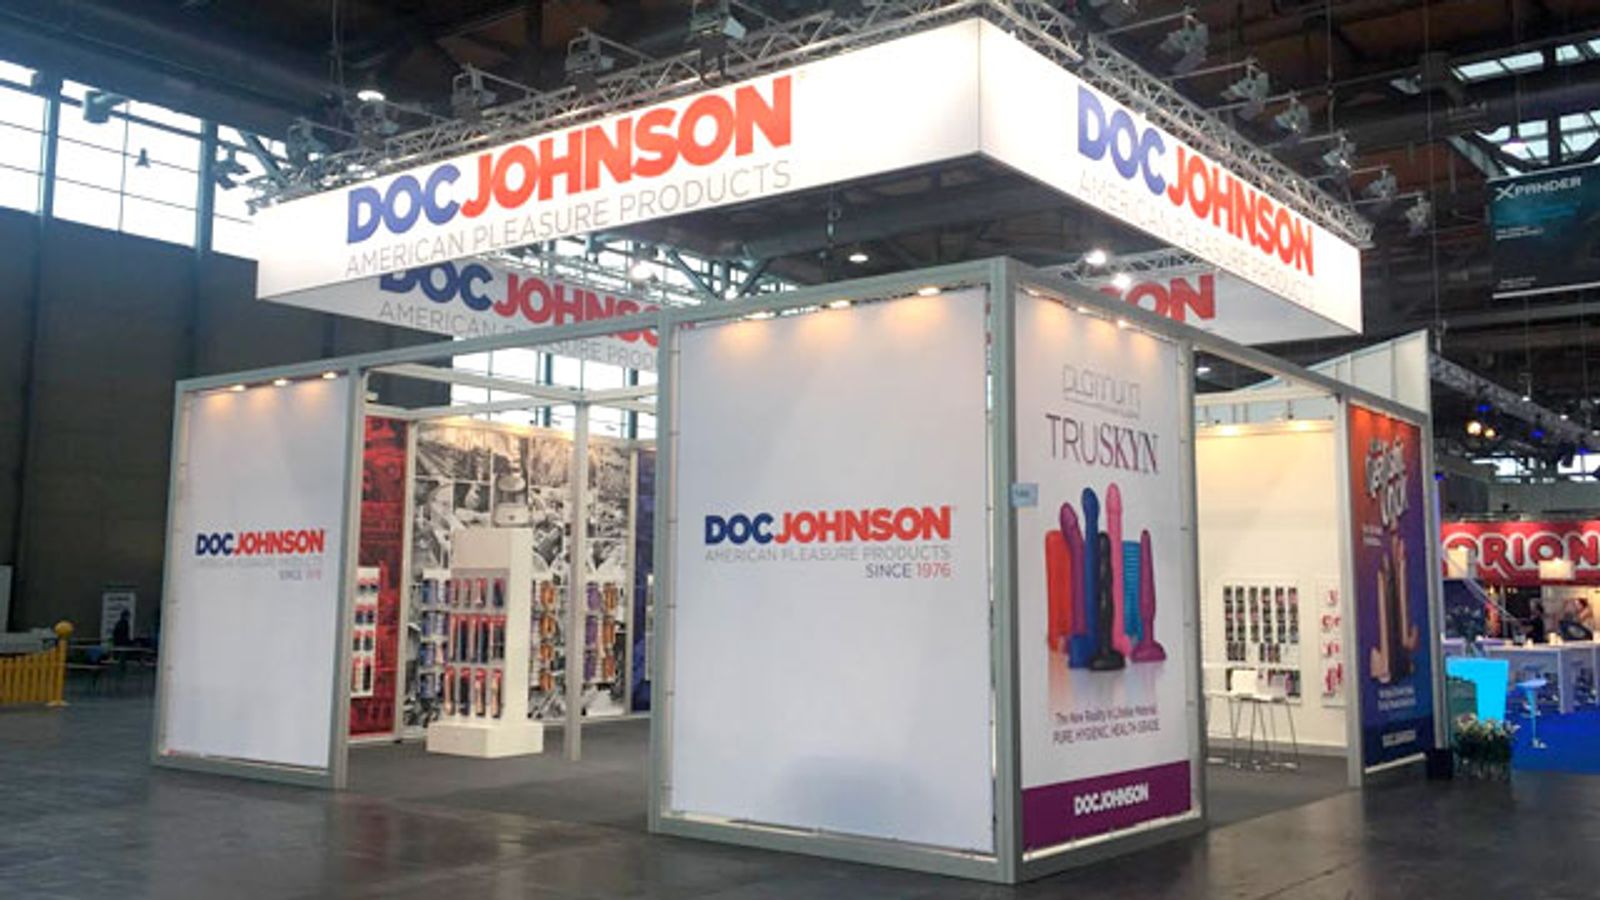 Doc Johnson Returns From Successful eroFame Show